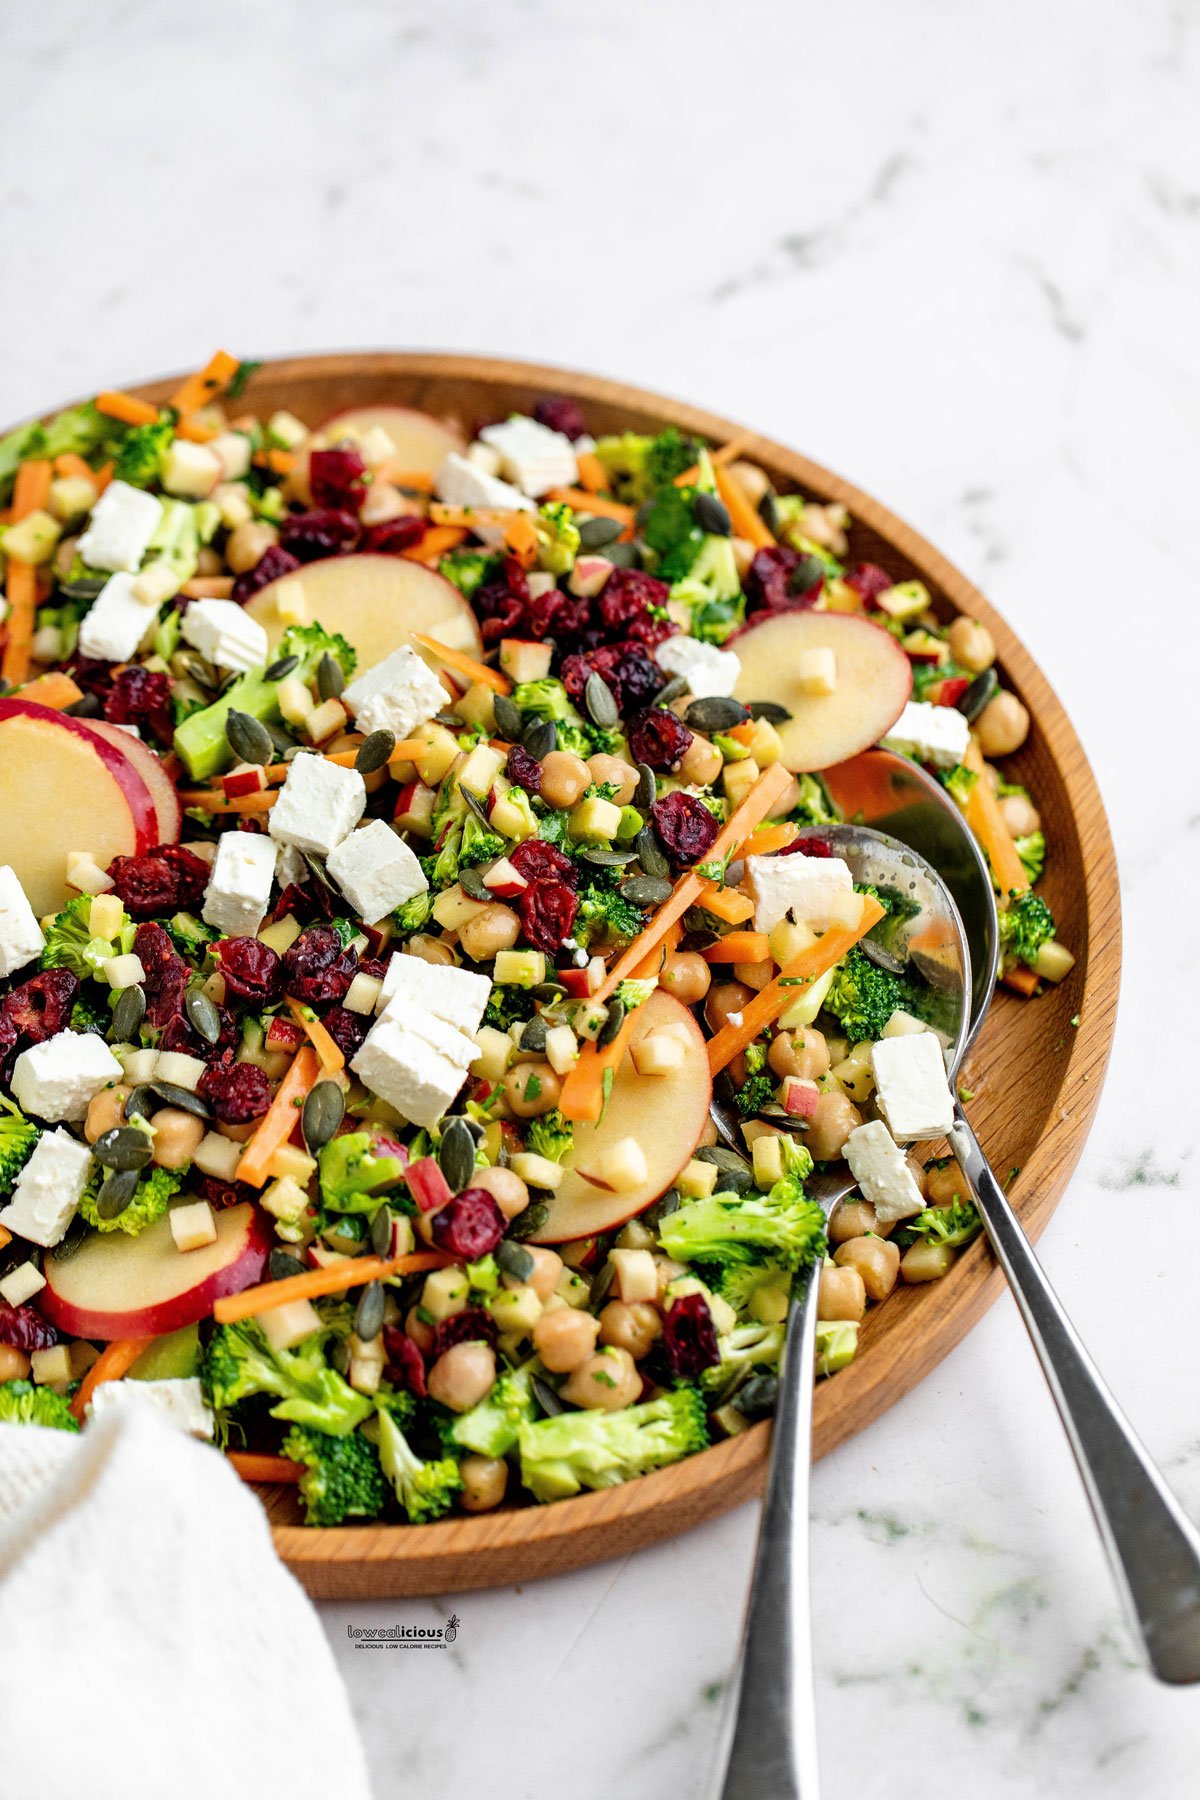 Healthy Broccoli Apple Salad Recipe with Cranberries in a wood serving bowl with two serving spoons